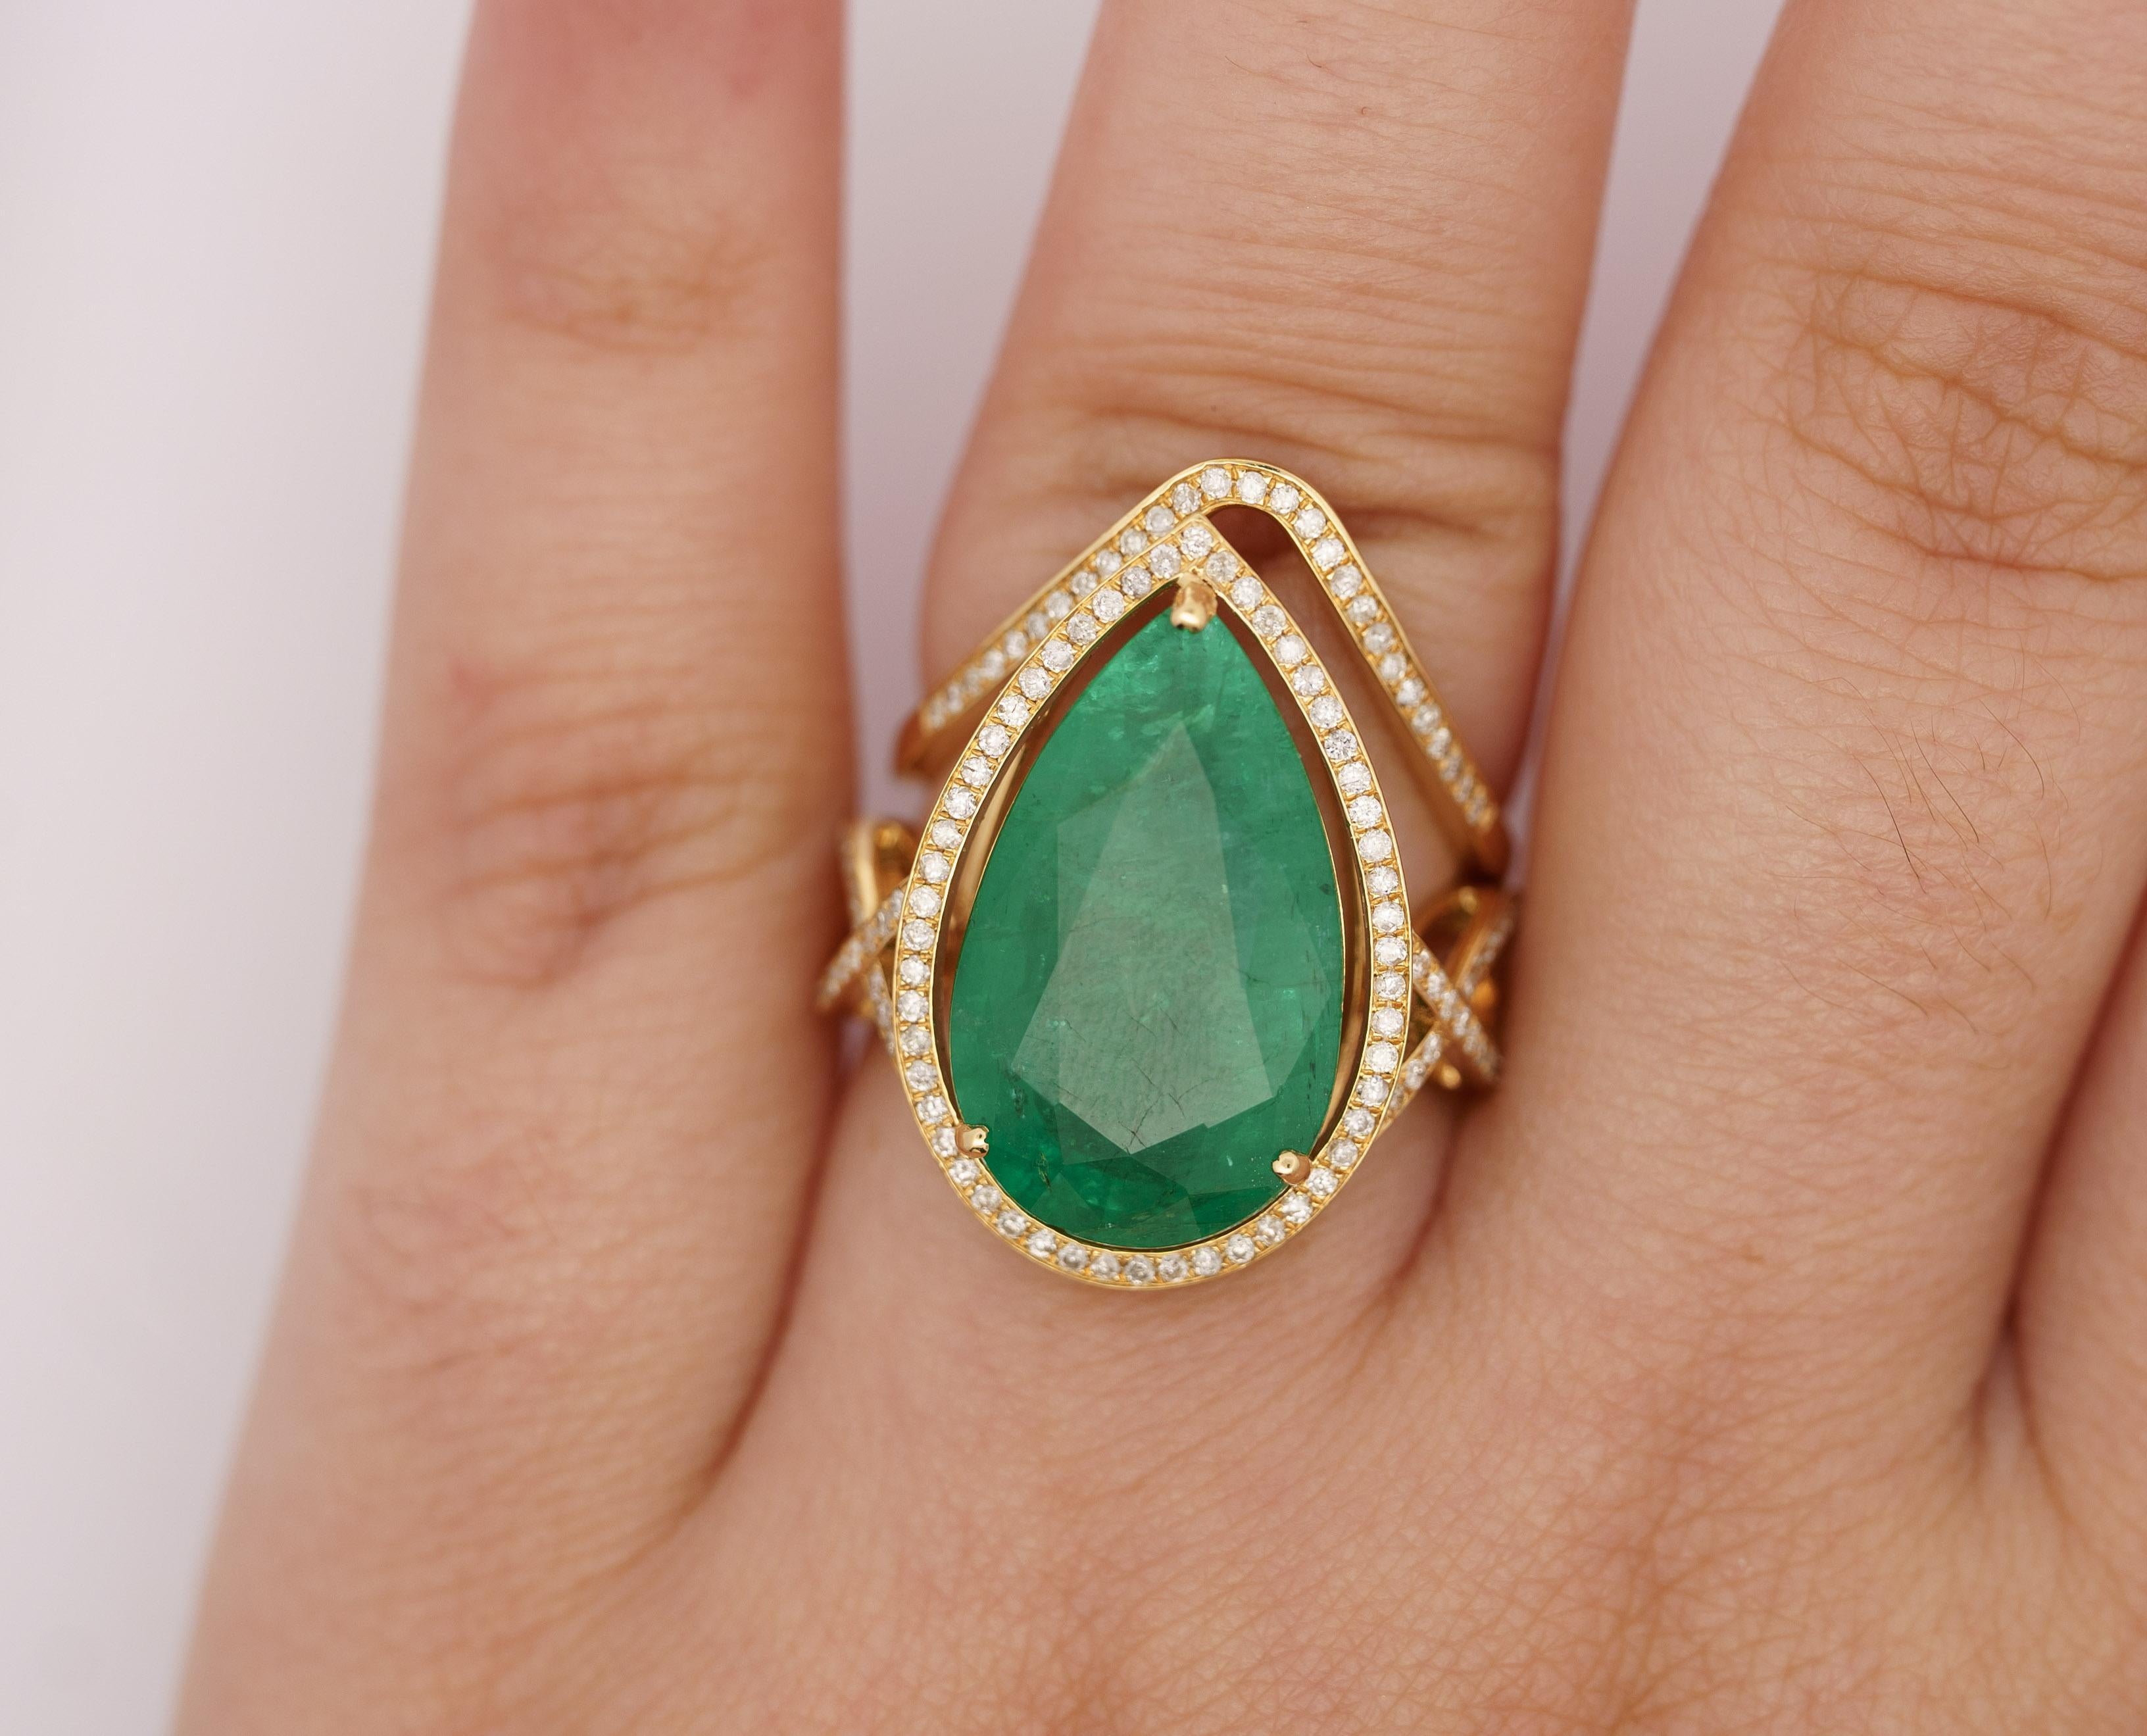 Contemporary Vintage 9 Carat Pear Cut Zambian Emerald & Diamond Halo Ring Jacket in 18K Gold For Sale